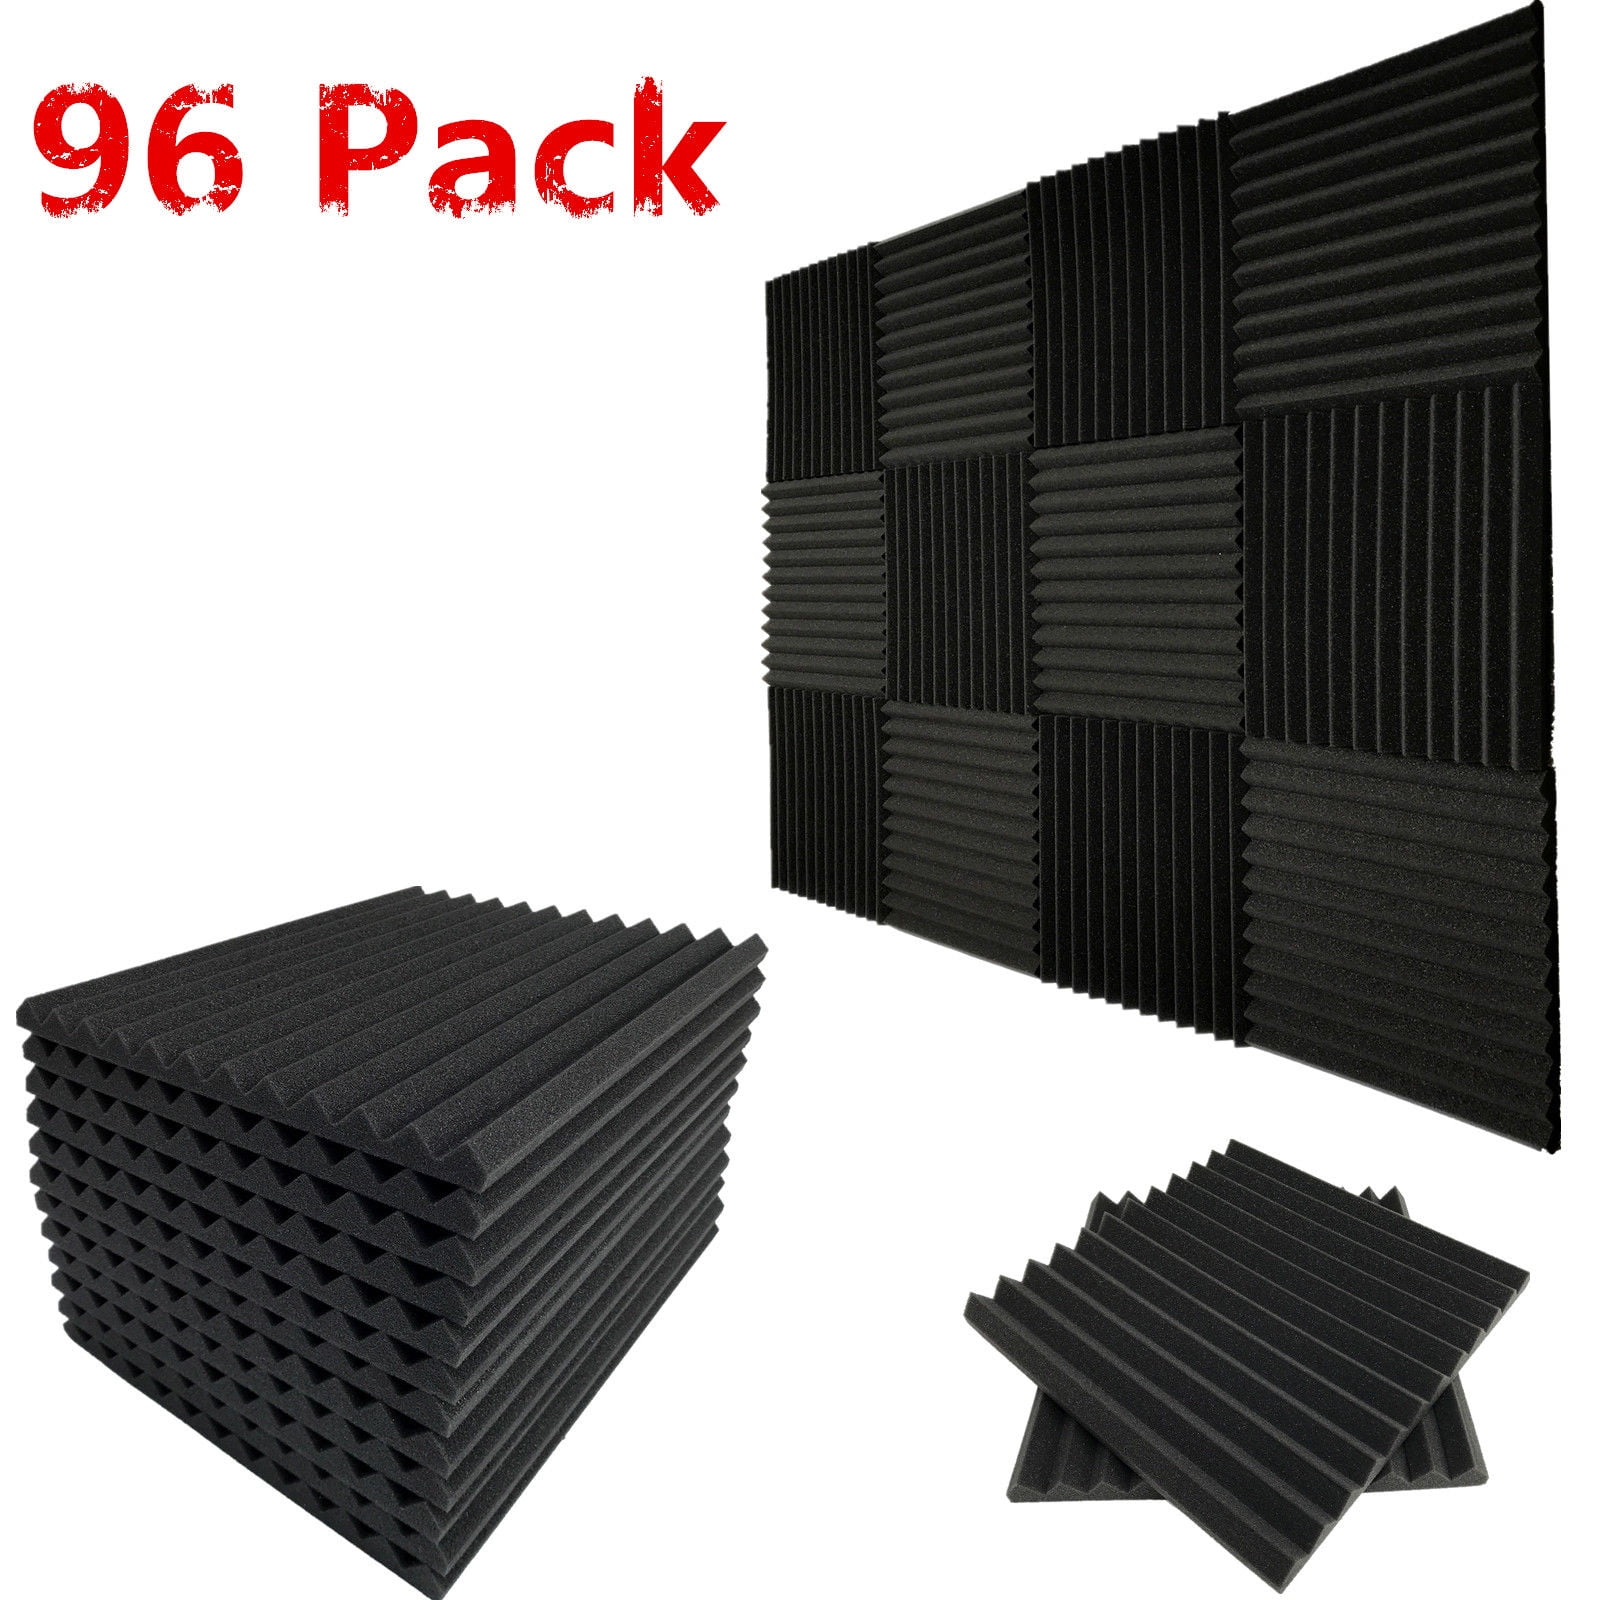 Soundproofing Foam Acoustic Studio Tiles Panels Wedge Pack Wall Sound Reduction 